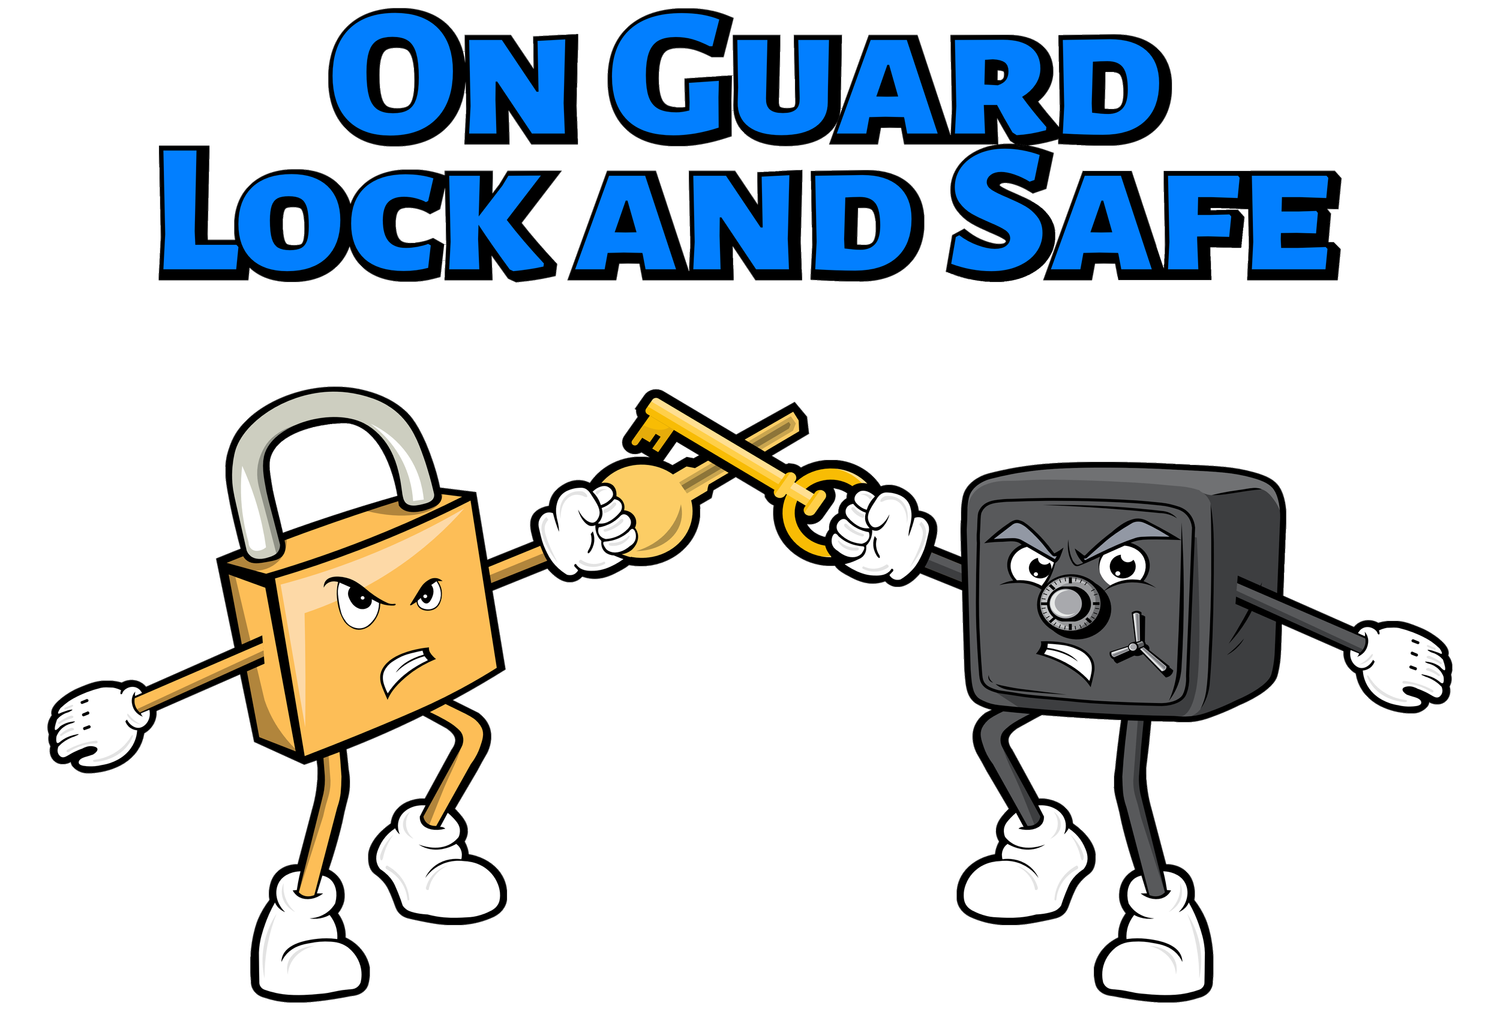 On Guard Lock and Safe